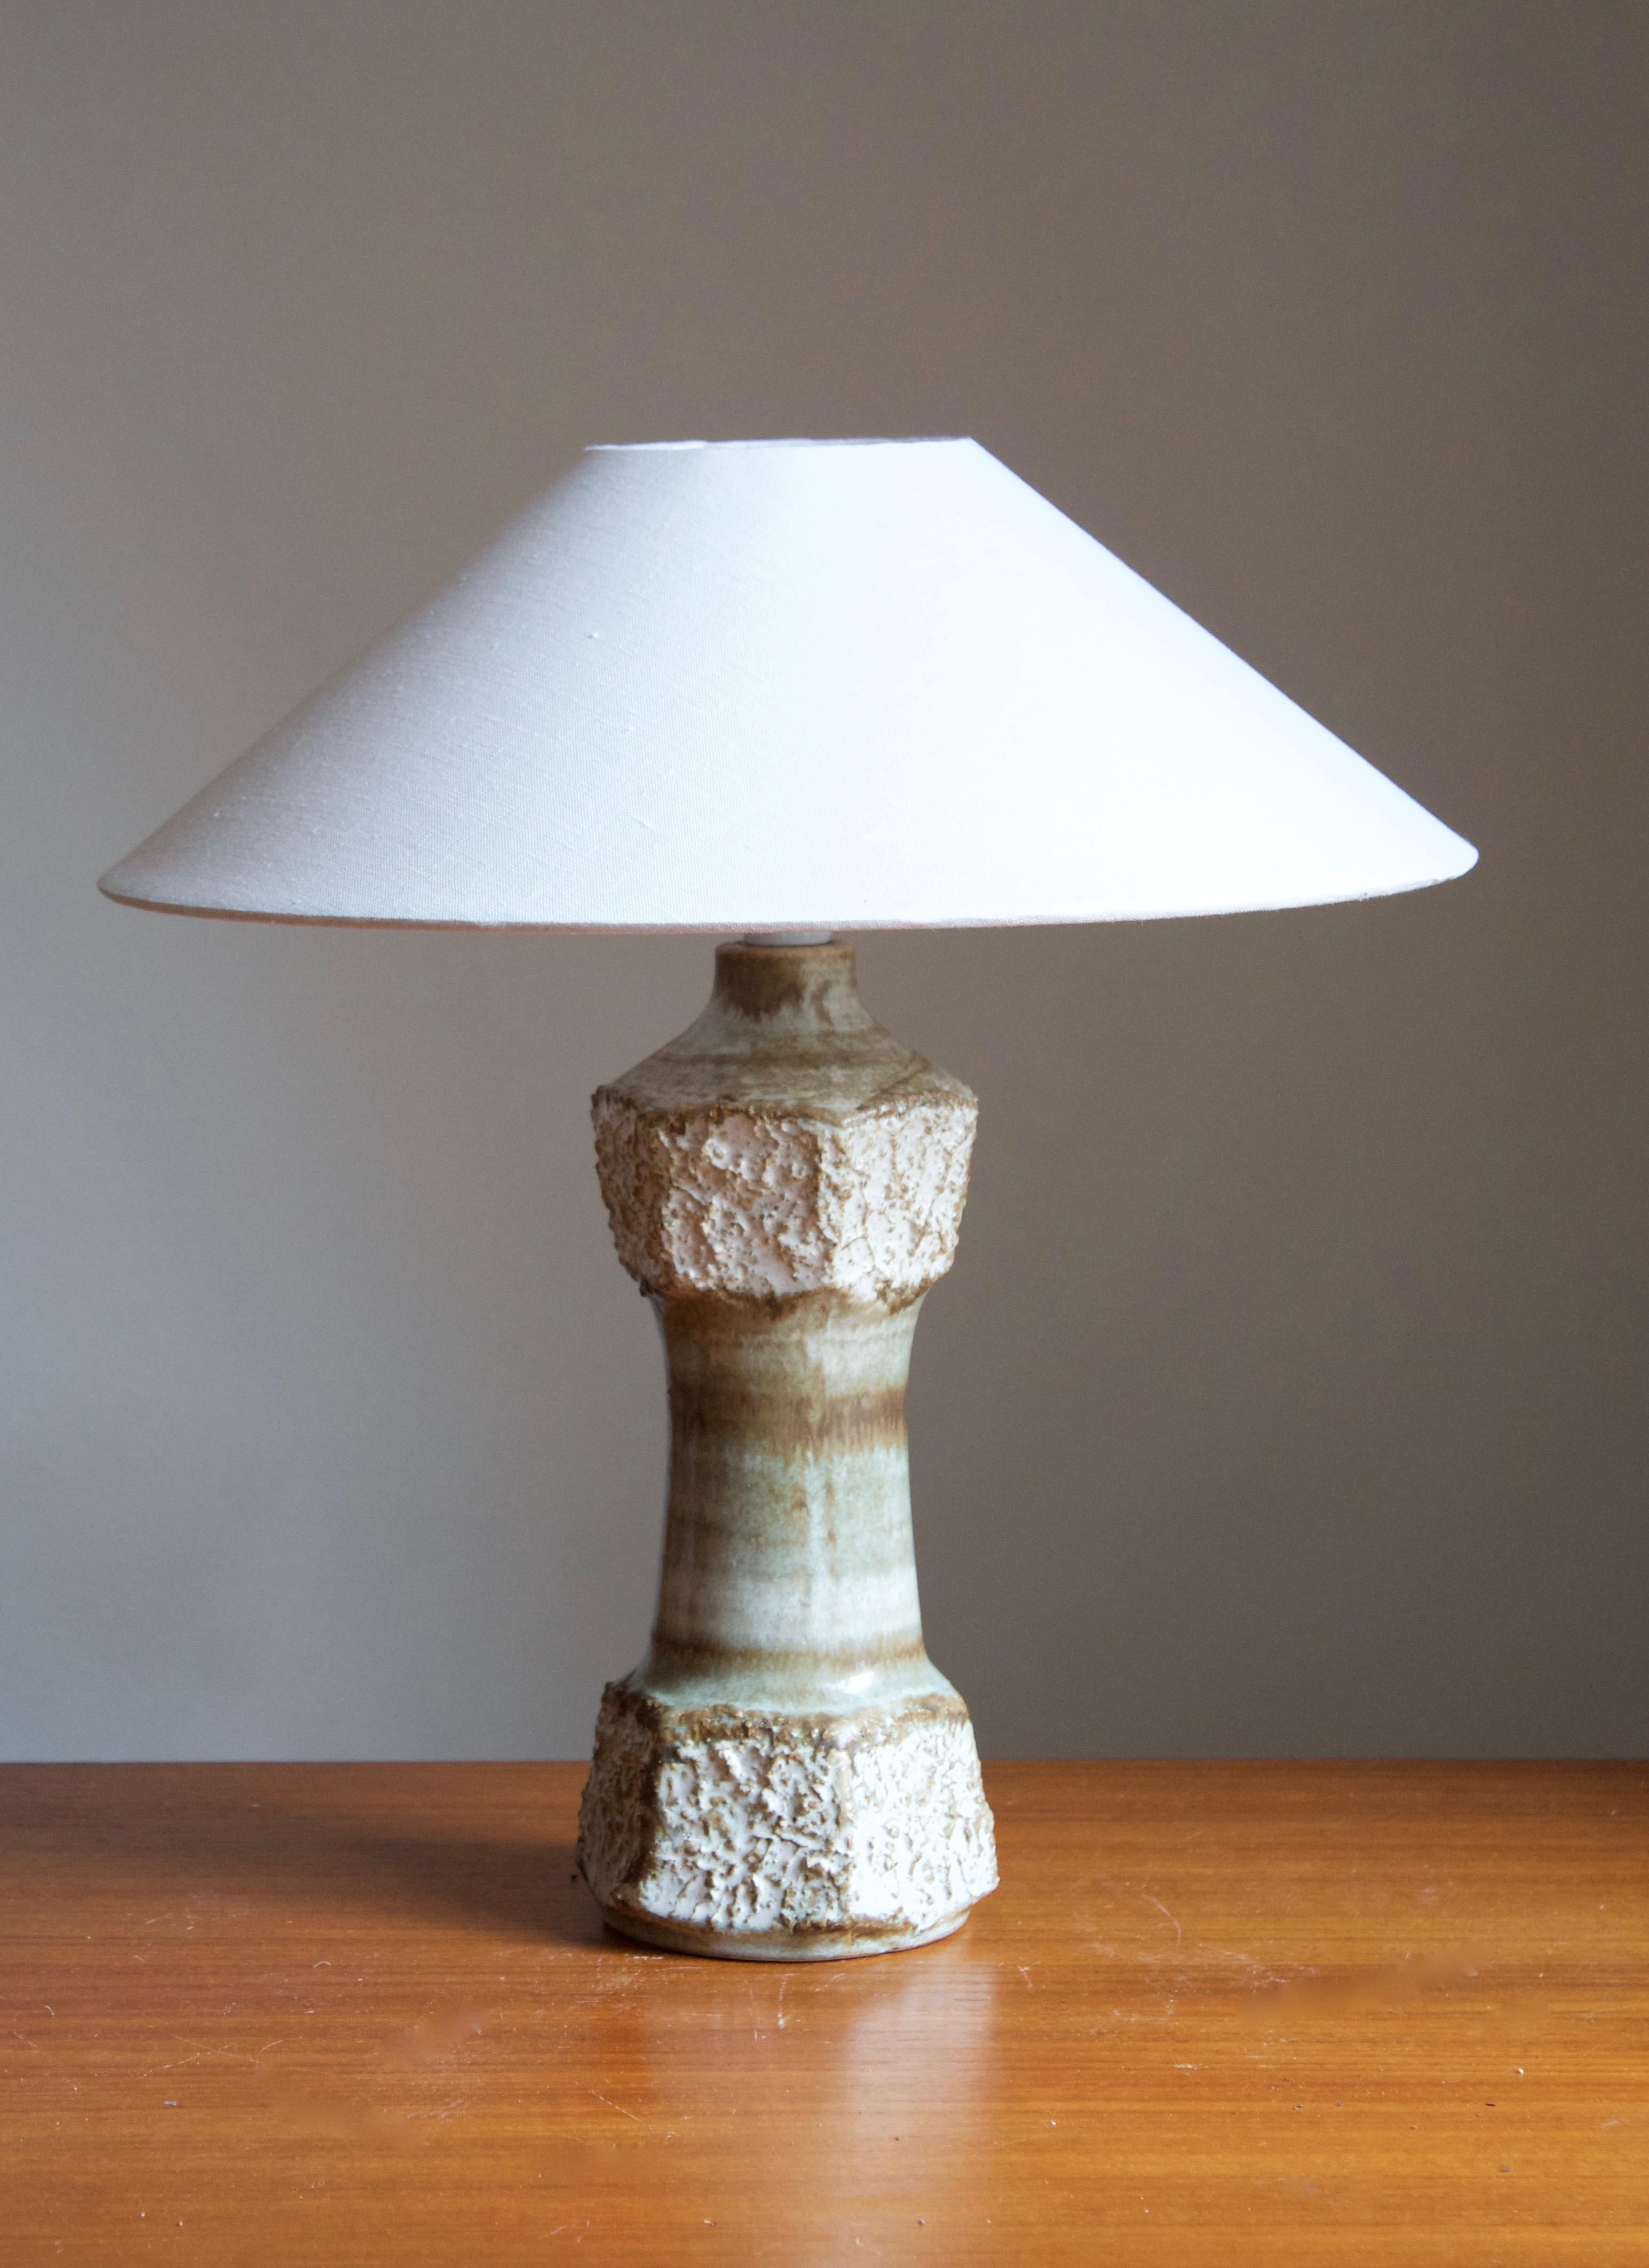 A stoneware table lamp, executed by Bruno Karlsson. In his Studio, called 